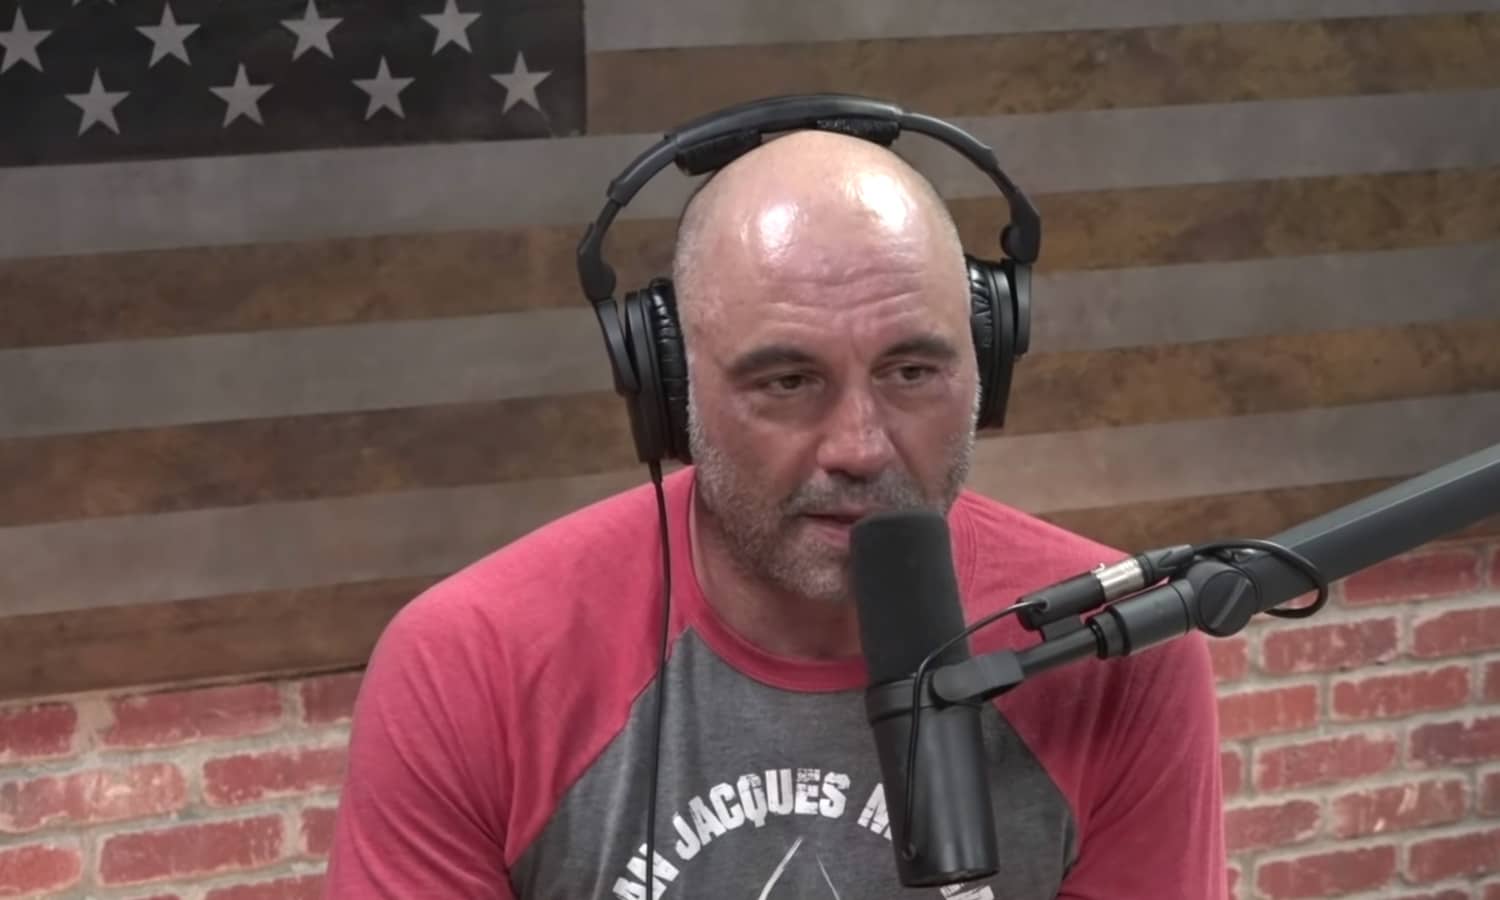 WATCH: This Is The One Thing Comedian Joe Rogan Won't Do High1500 x 900